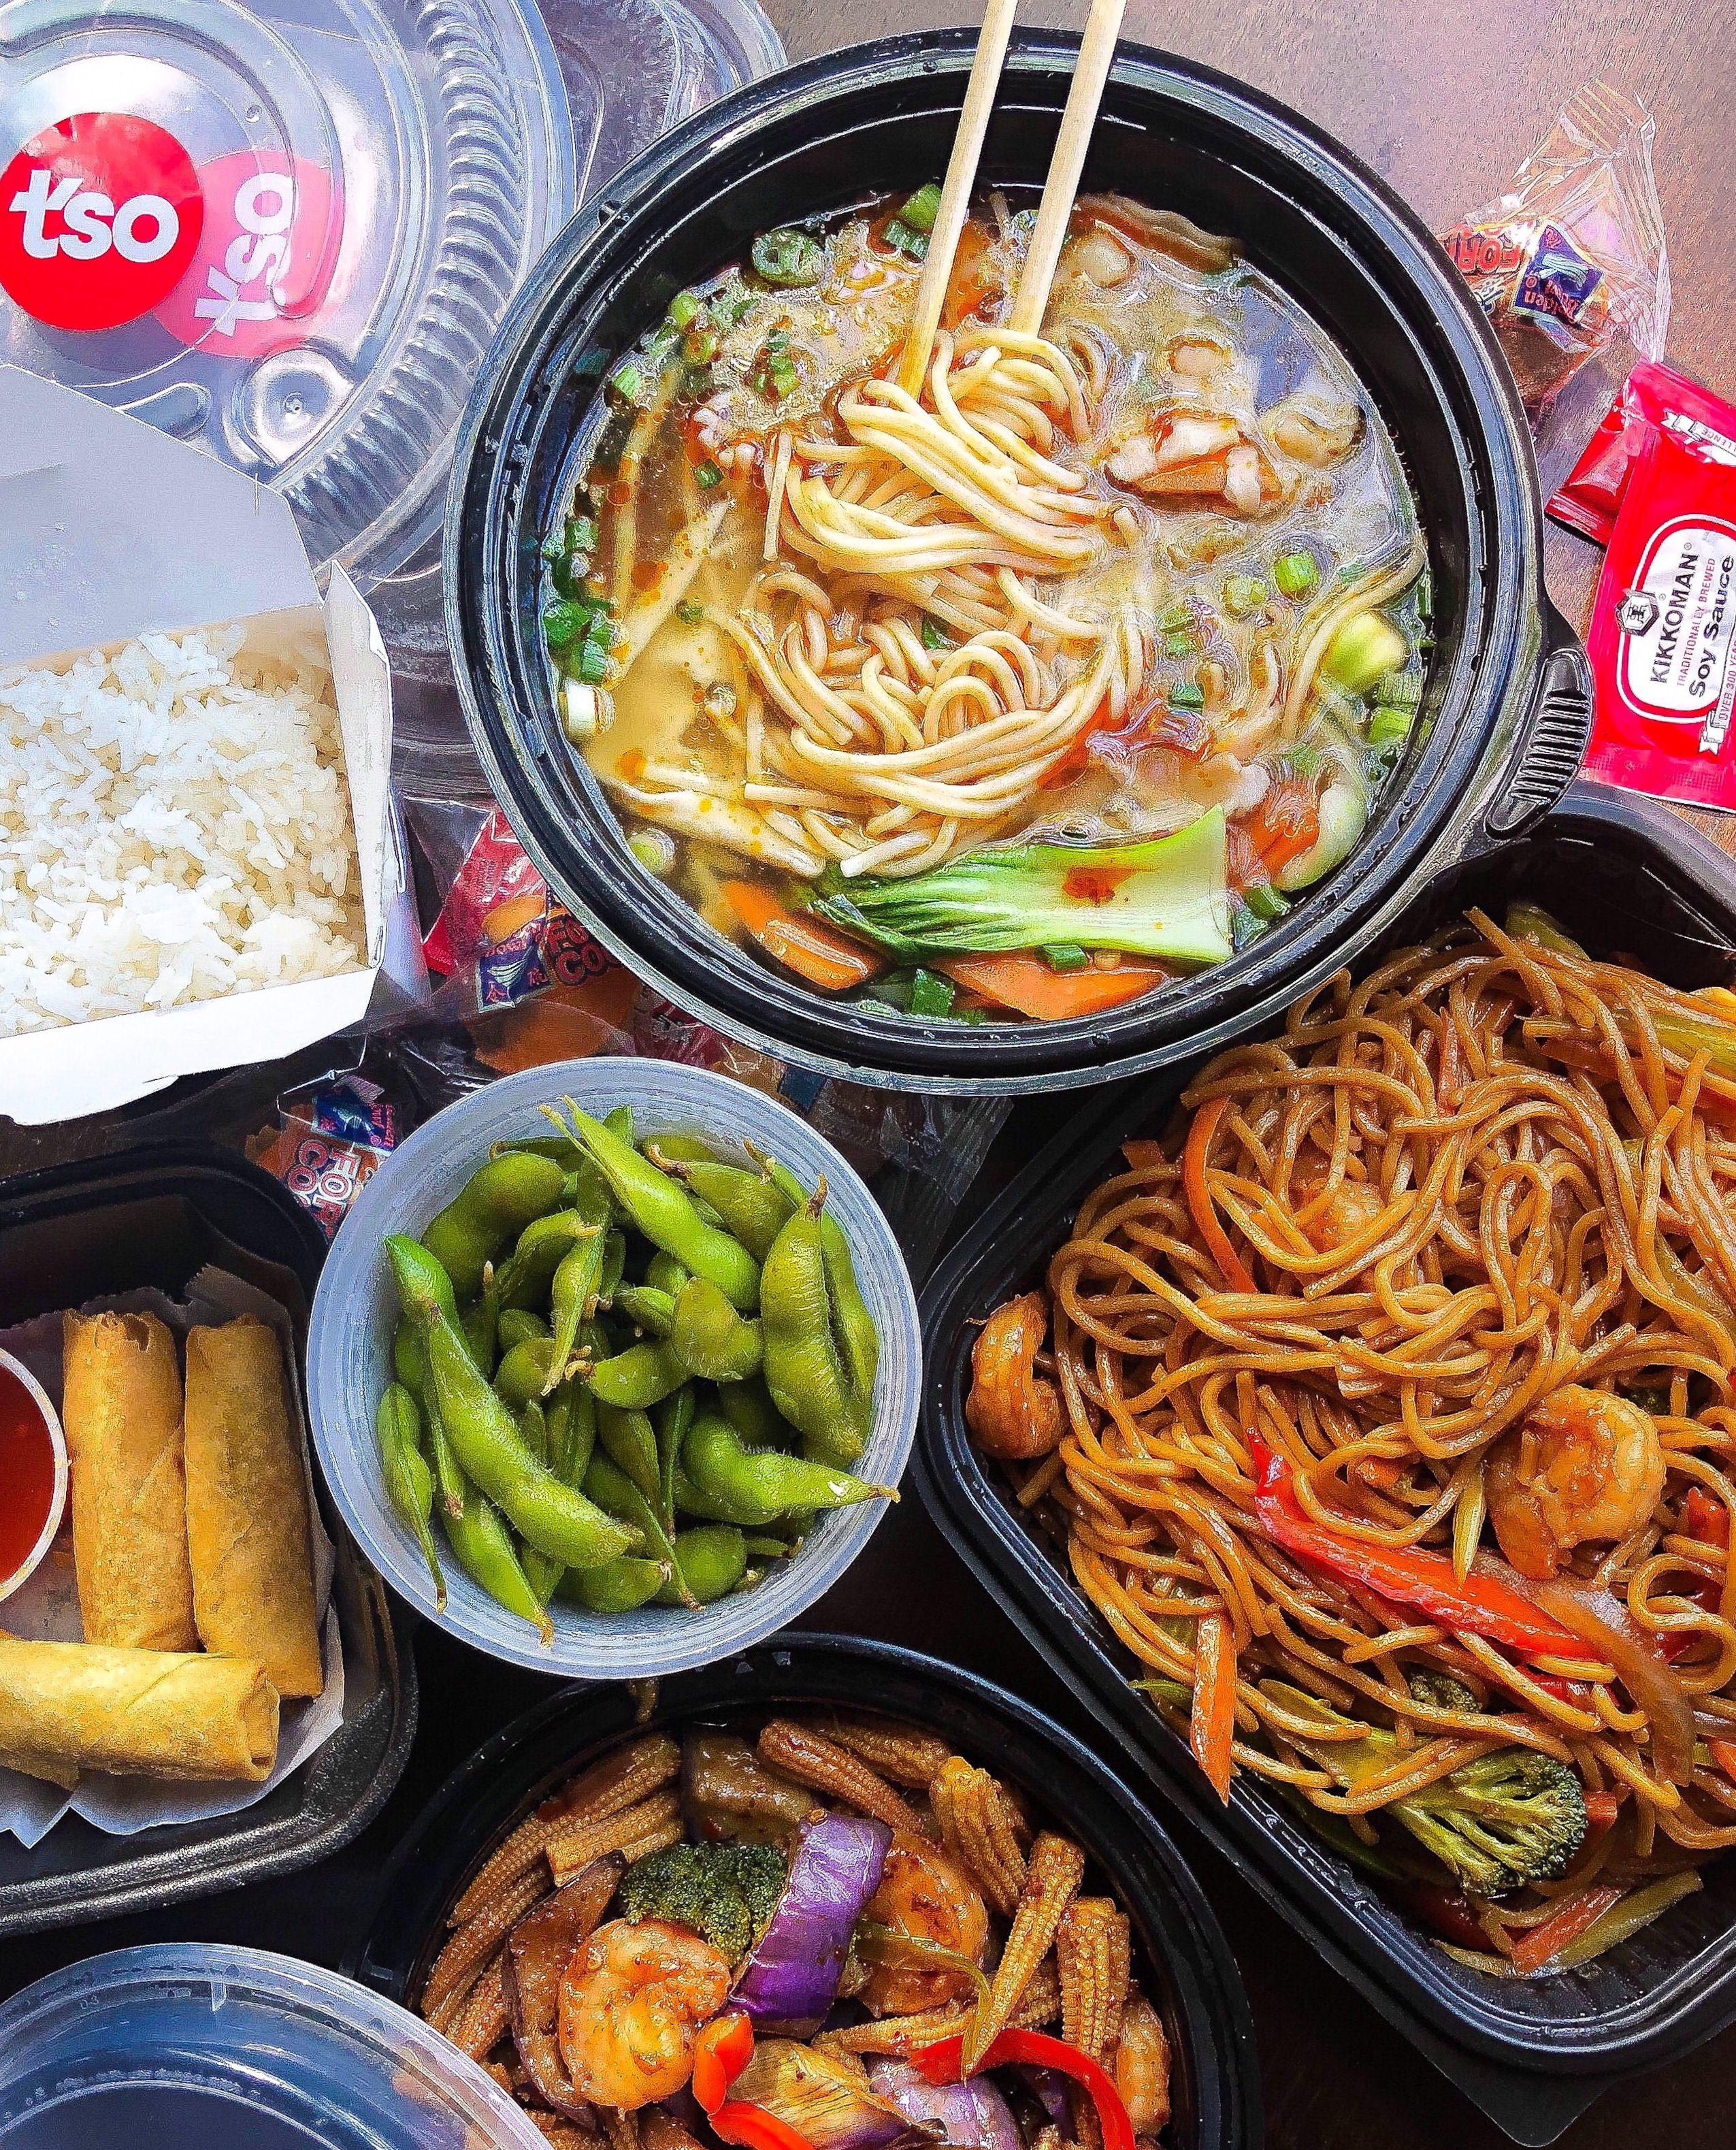 Tso Chinese Delivery Photo